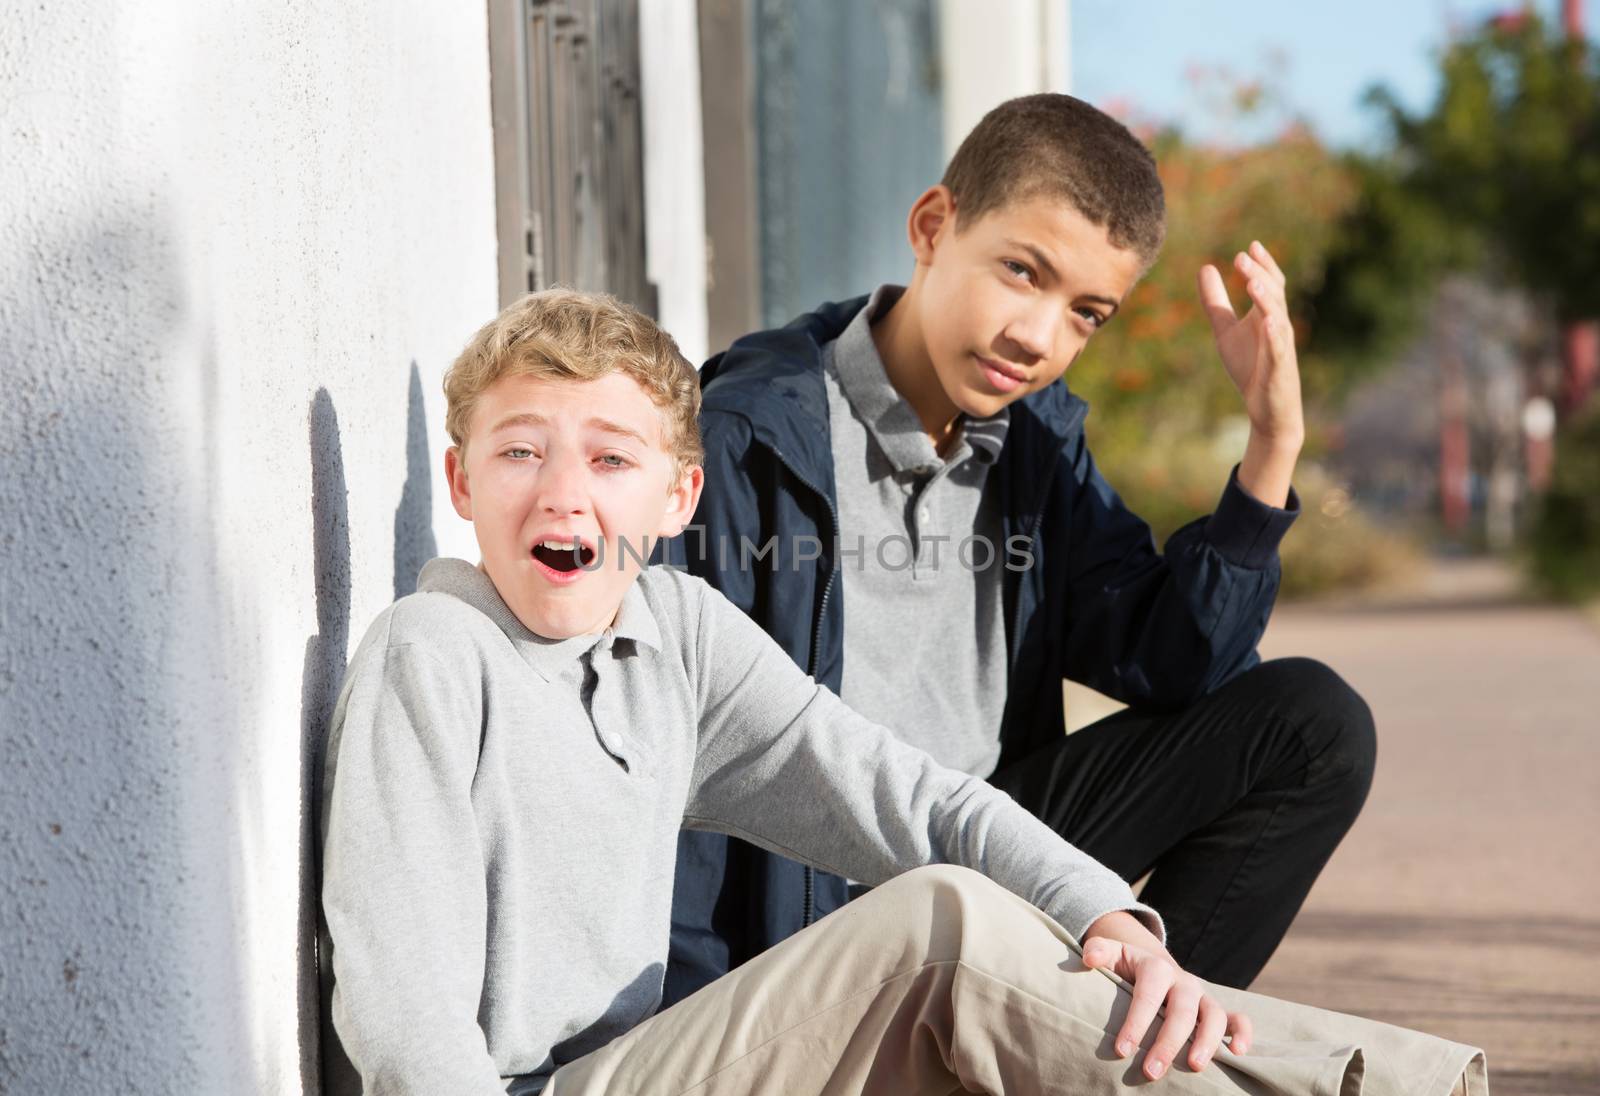 Embarrassed teen sitting next to yelling friend outside near wall